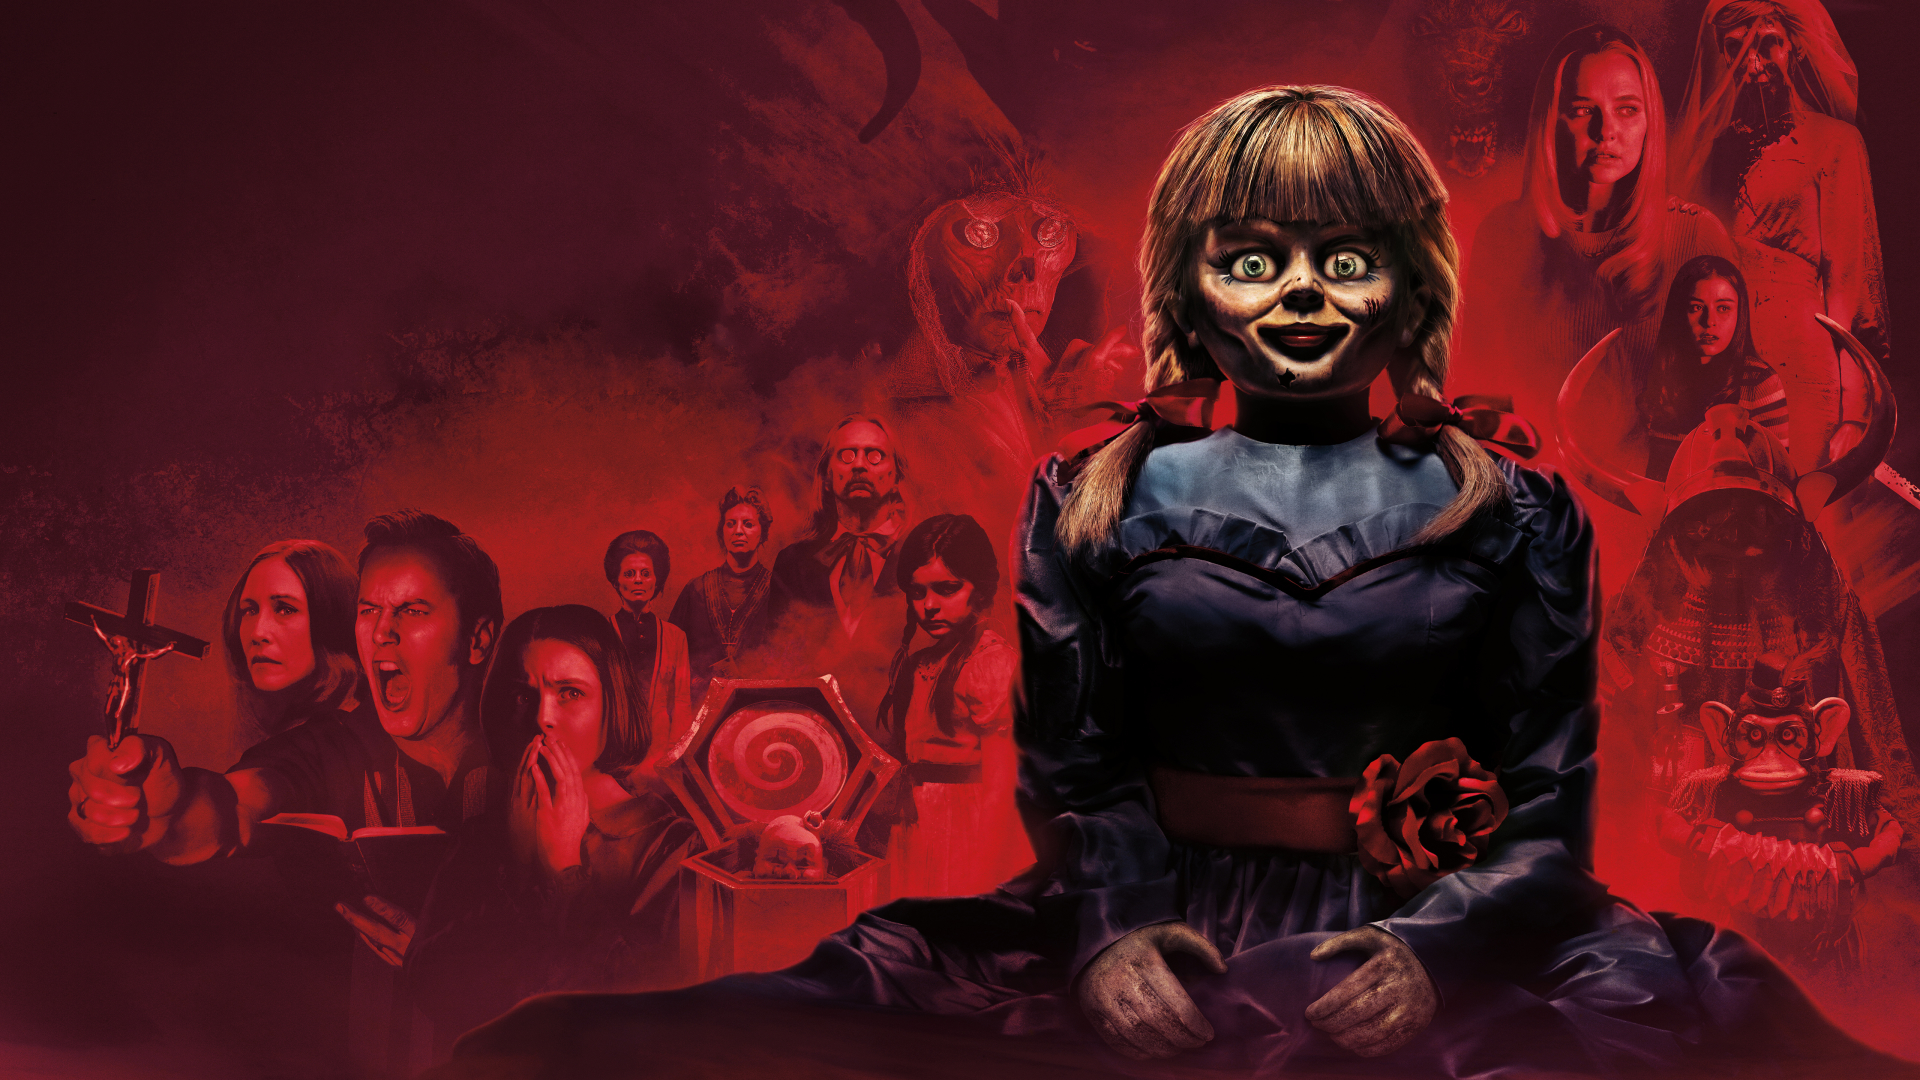 Annabelle Comes Home Review